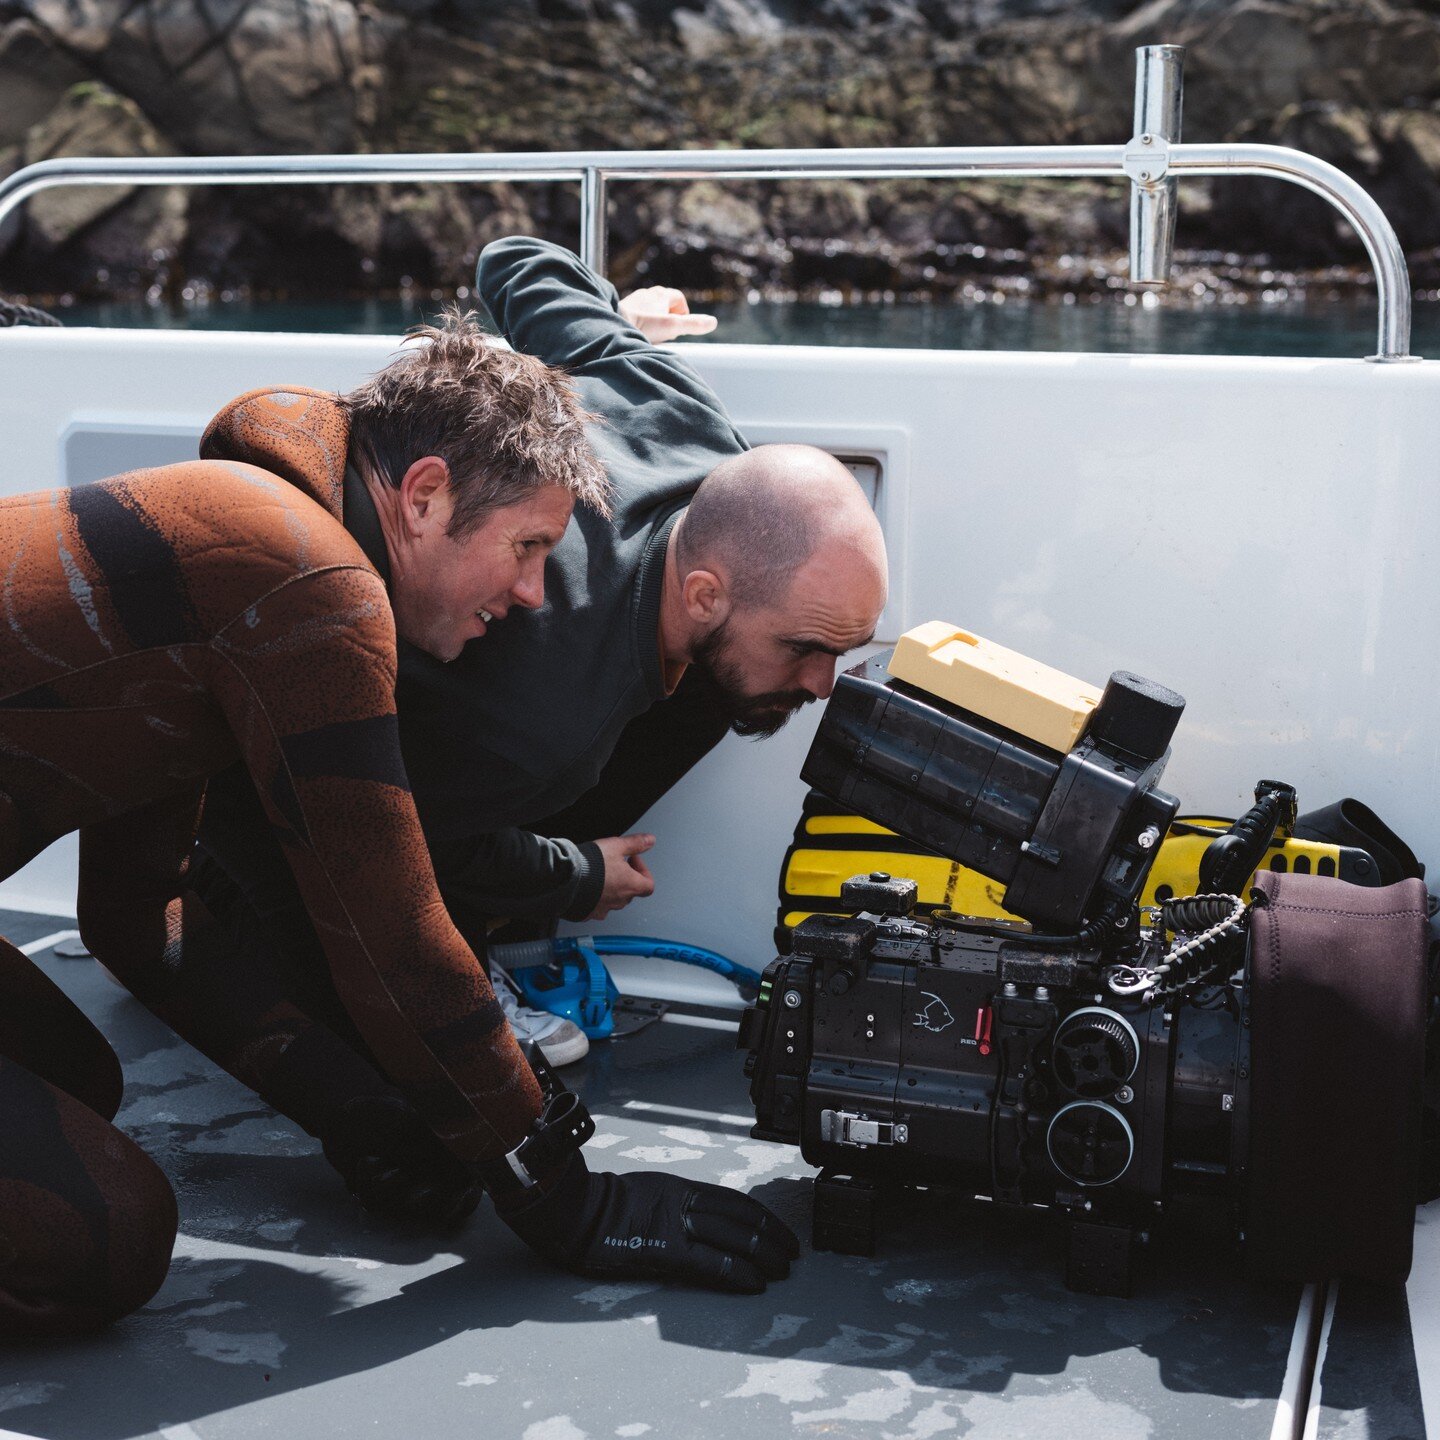 Checking out what's happening beneath the waves on what is possibly the heaviest camera rig in existence. Sneaky #BTS shot while filming The Sea and Me (Link on my website). #documentary #filmmaking Thanks @billybarraclough for the pic.